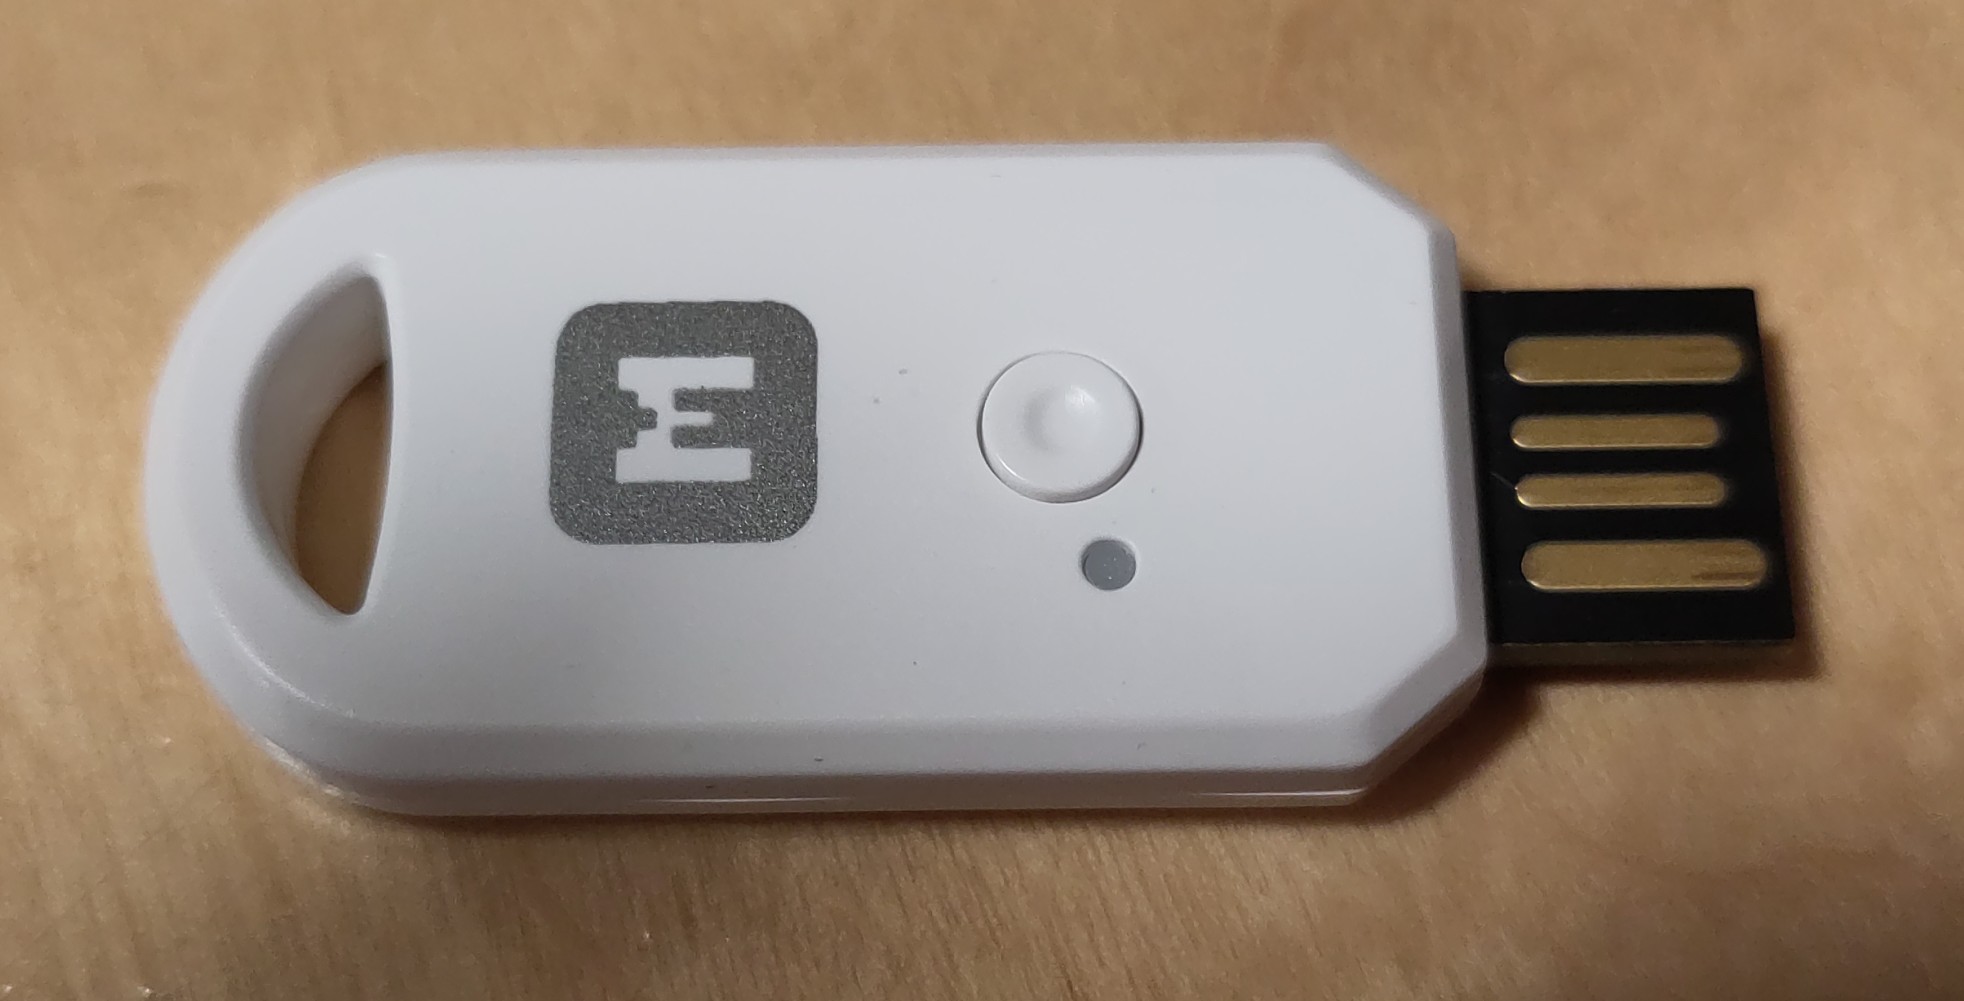 You can see a kind of USB stick lying on a wooden surface. It has an "M" logo printed on it. There is also a small cut-out for a key fob. You can also see a small button and an LED (or that there is a gray dot that can light up). The USB dongle is white.